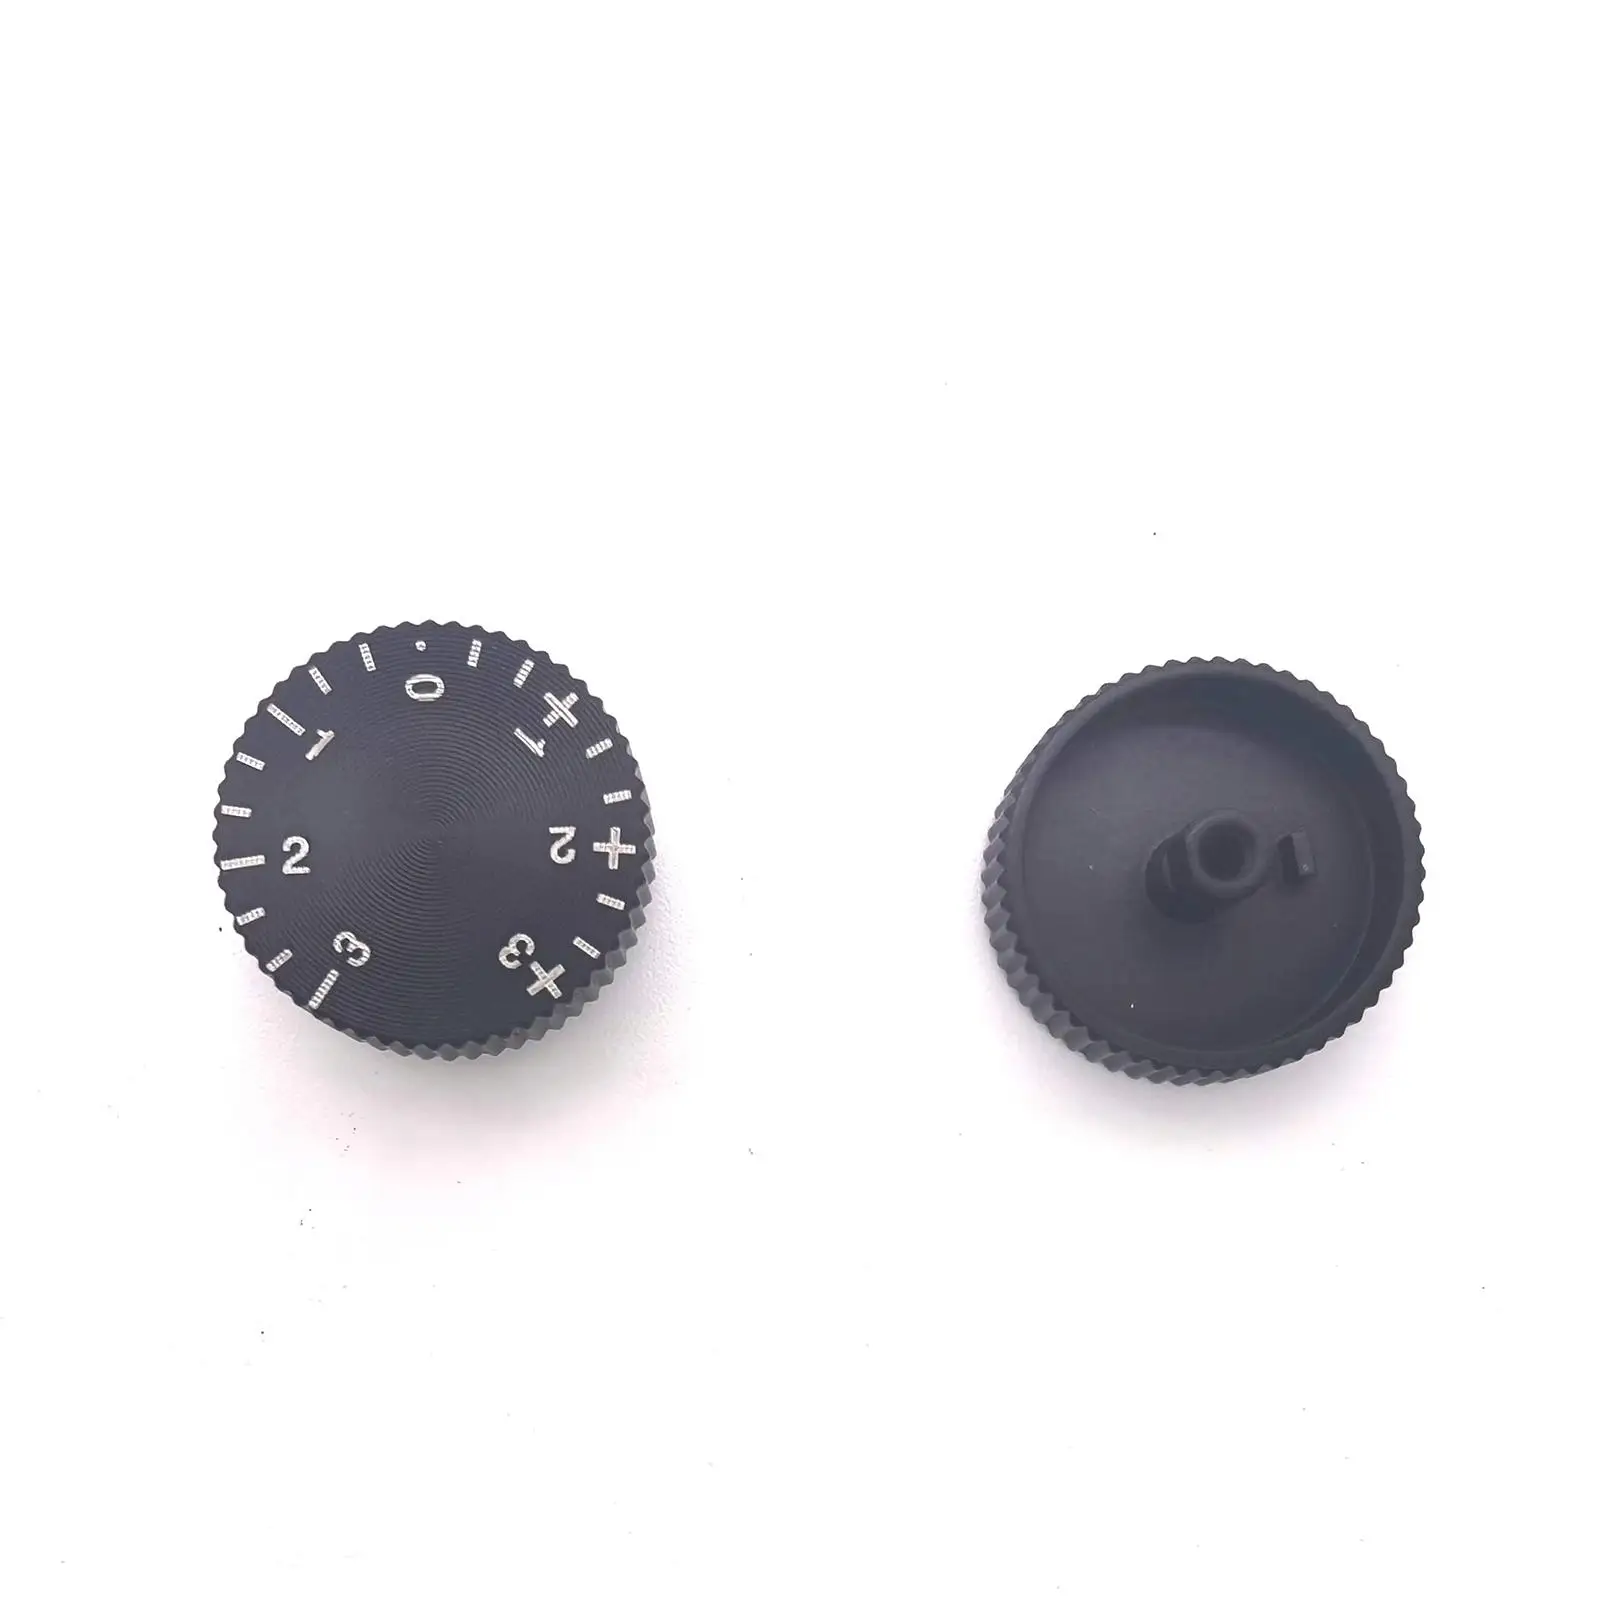 Durable Mode Dial Top Cover Black Professional Digital Camera Plate Interface Cap for A72 A7R3 Accessory Replacement Fittings